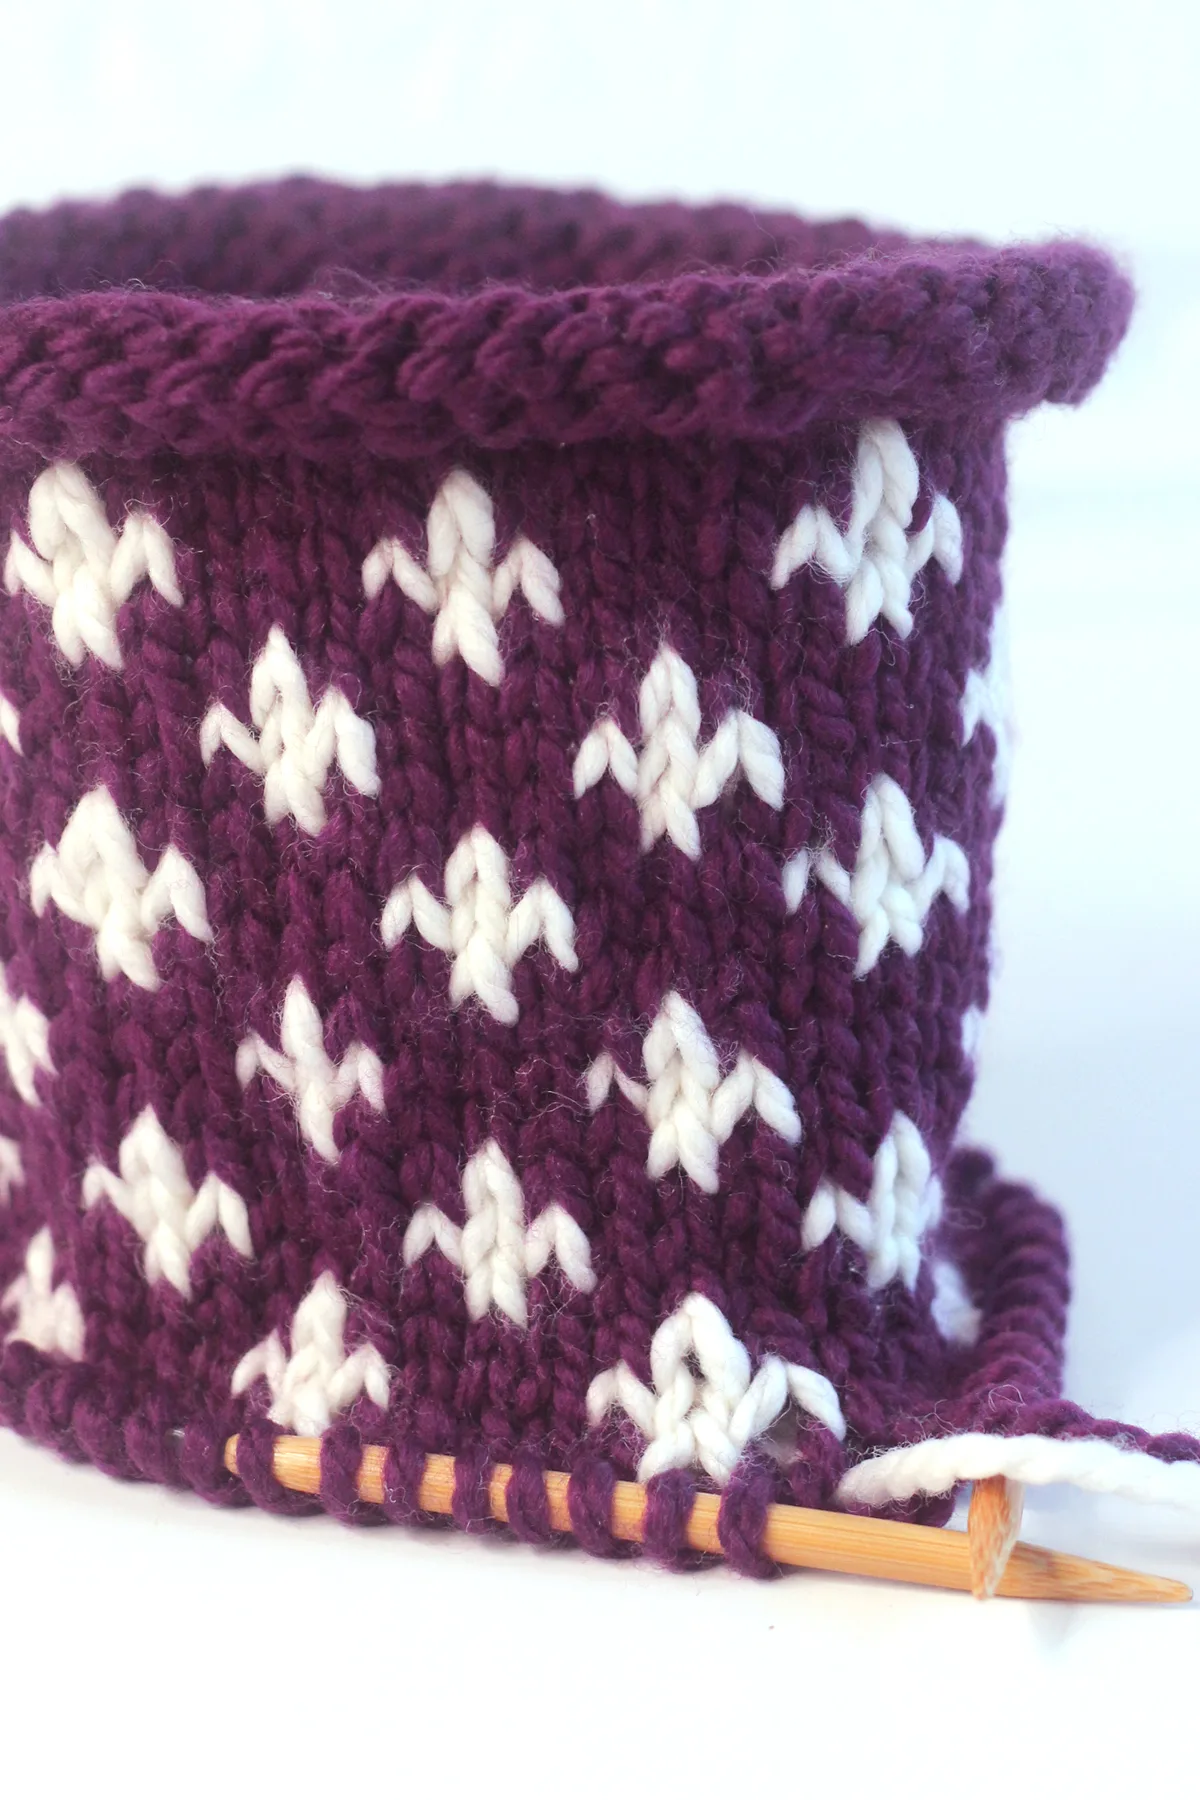 Fleur de Lys knit stitch pattern in purple and white color yarn on circular knitting needle.